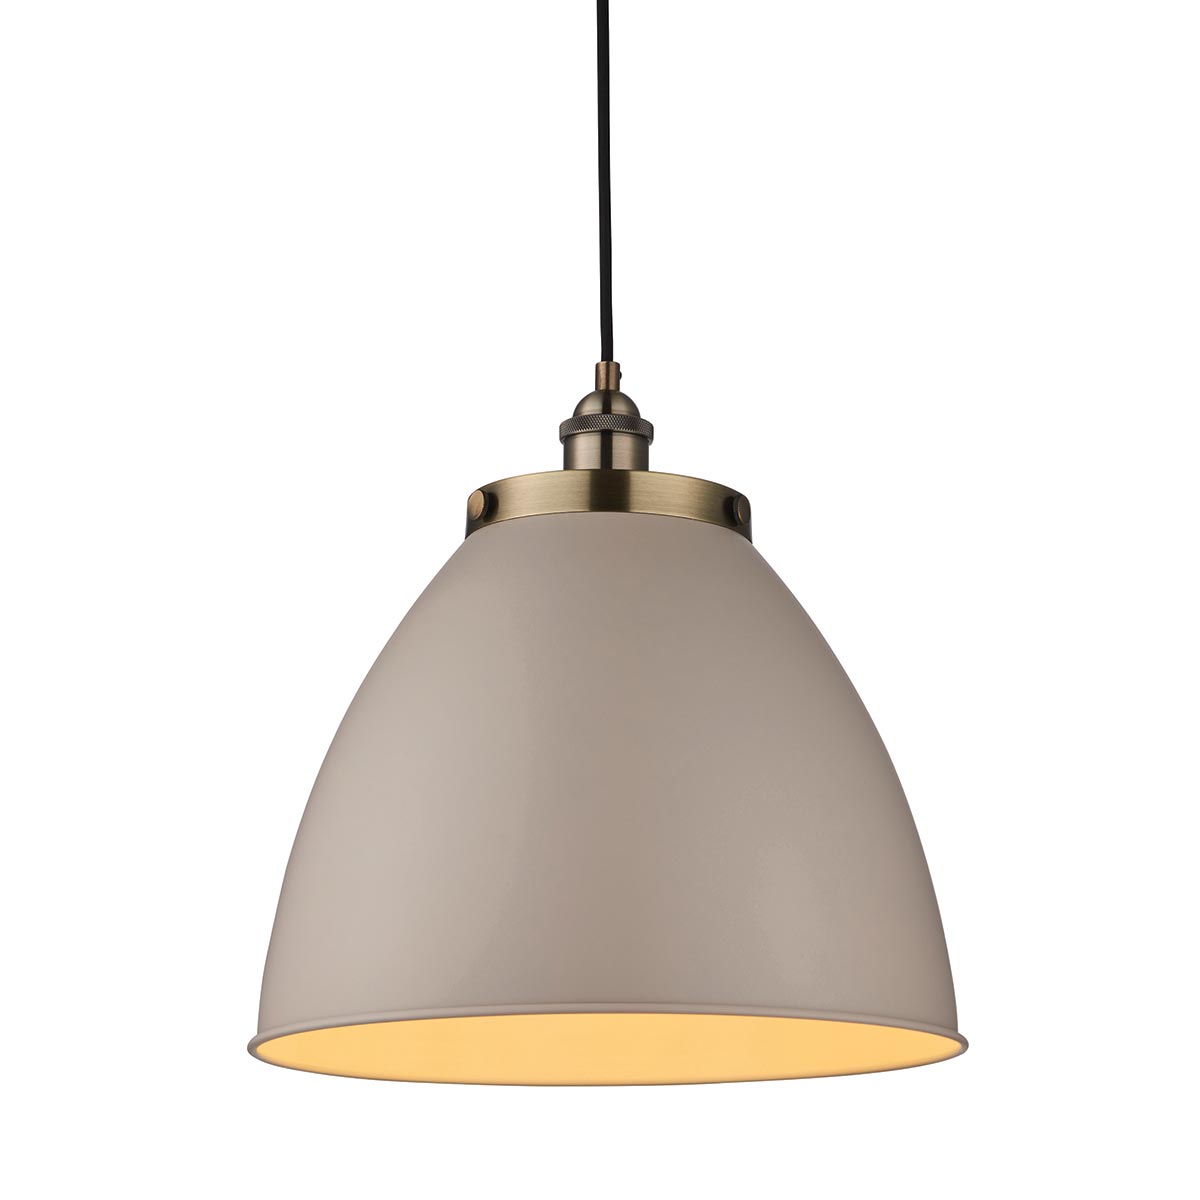 Endon Franklin Small Pendant Light Antique Brass & Taupe